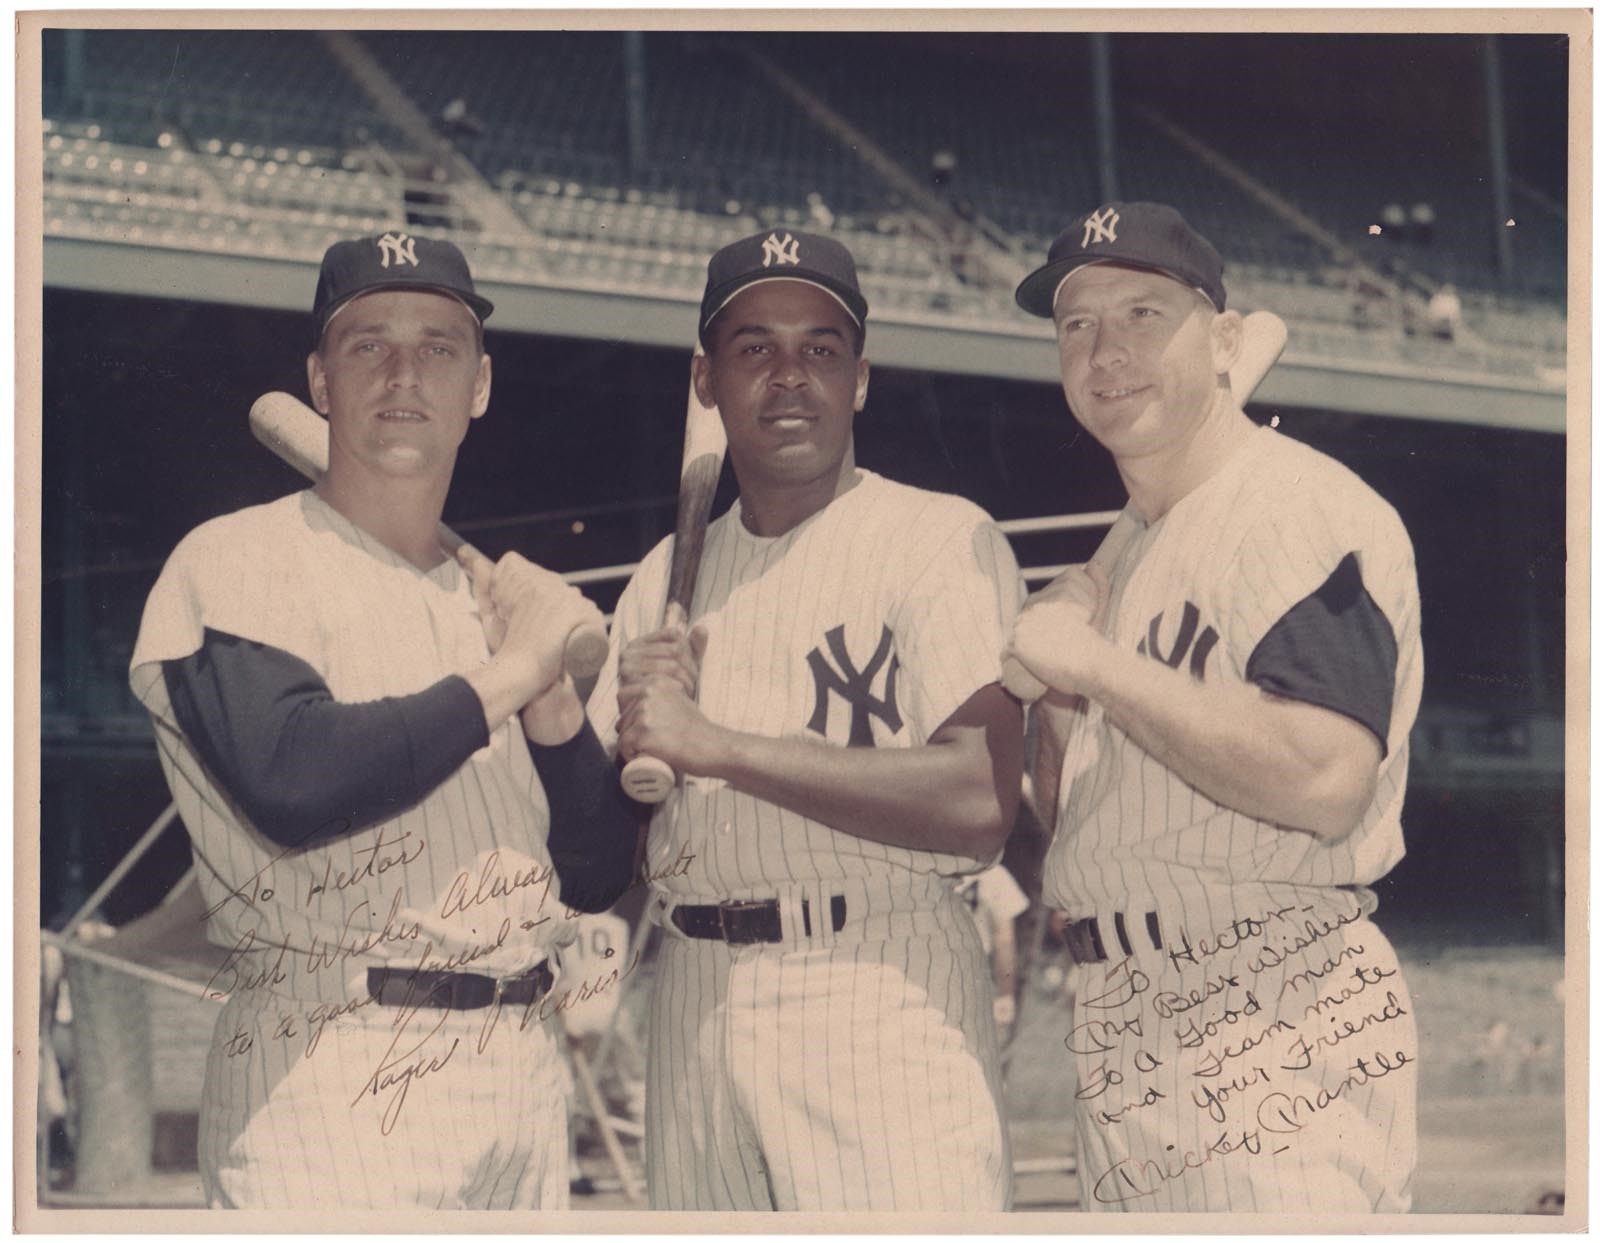 Mantle and Maris - Circa 1961 Mickey Mantle & Roger Maris Vintage Signed Photograph to Teammate Hector Lopez (PSA)